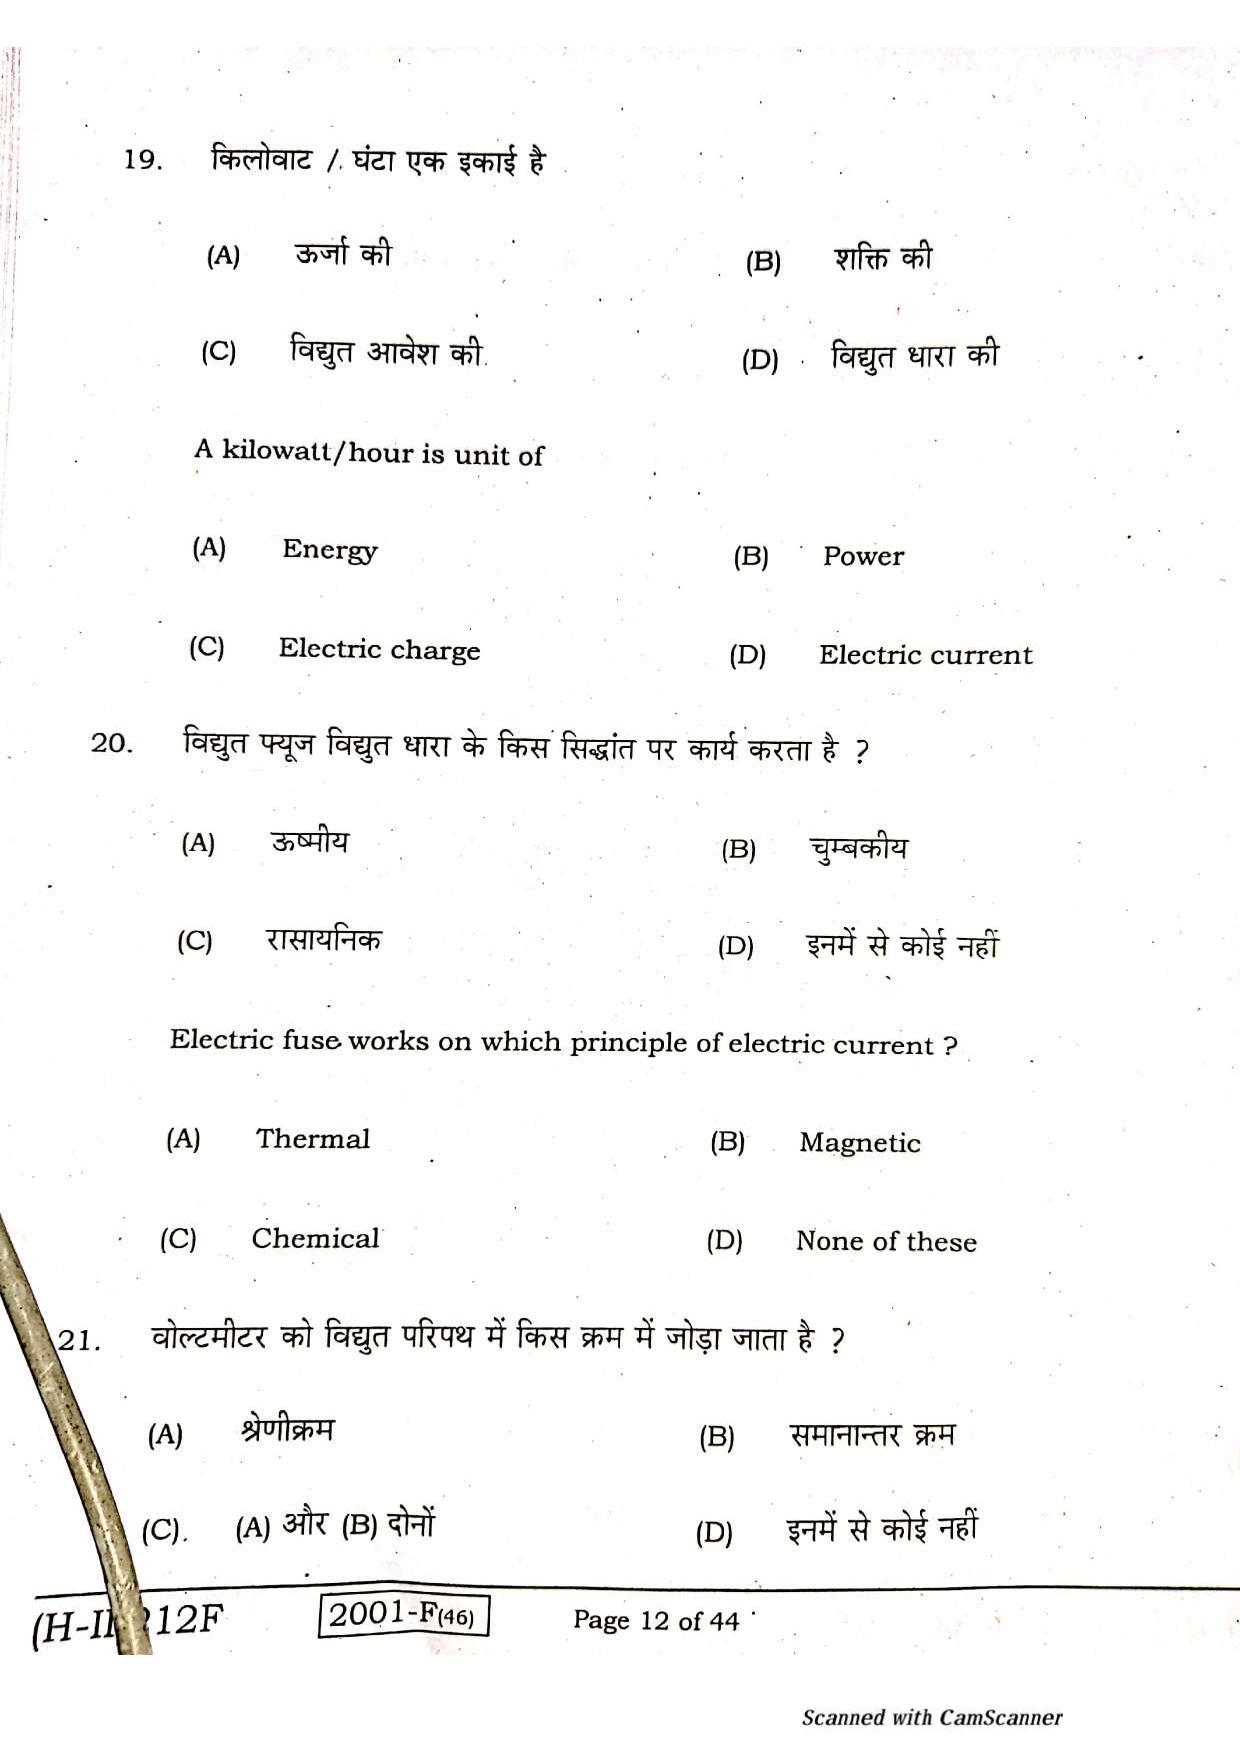 Bihar Board Class 10 Science 2021 (2nd Sitting) Question Paper - Page 10